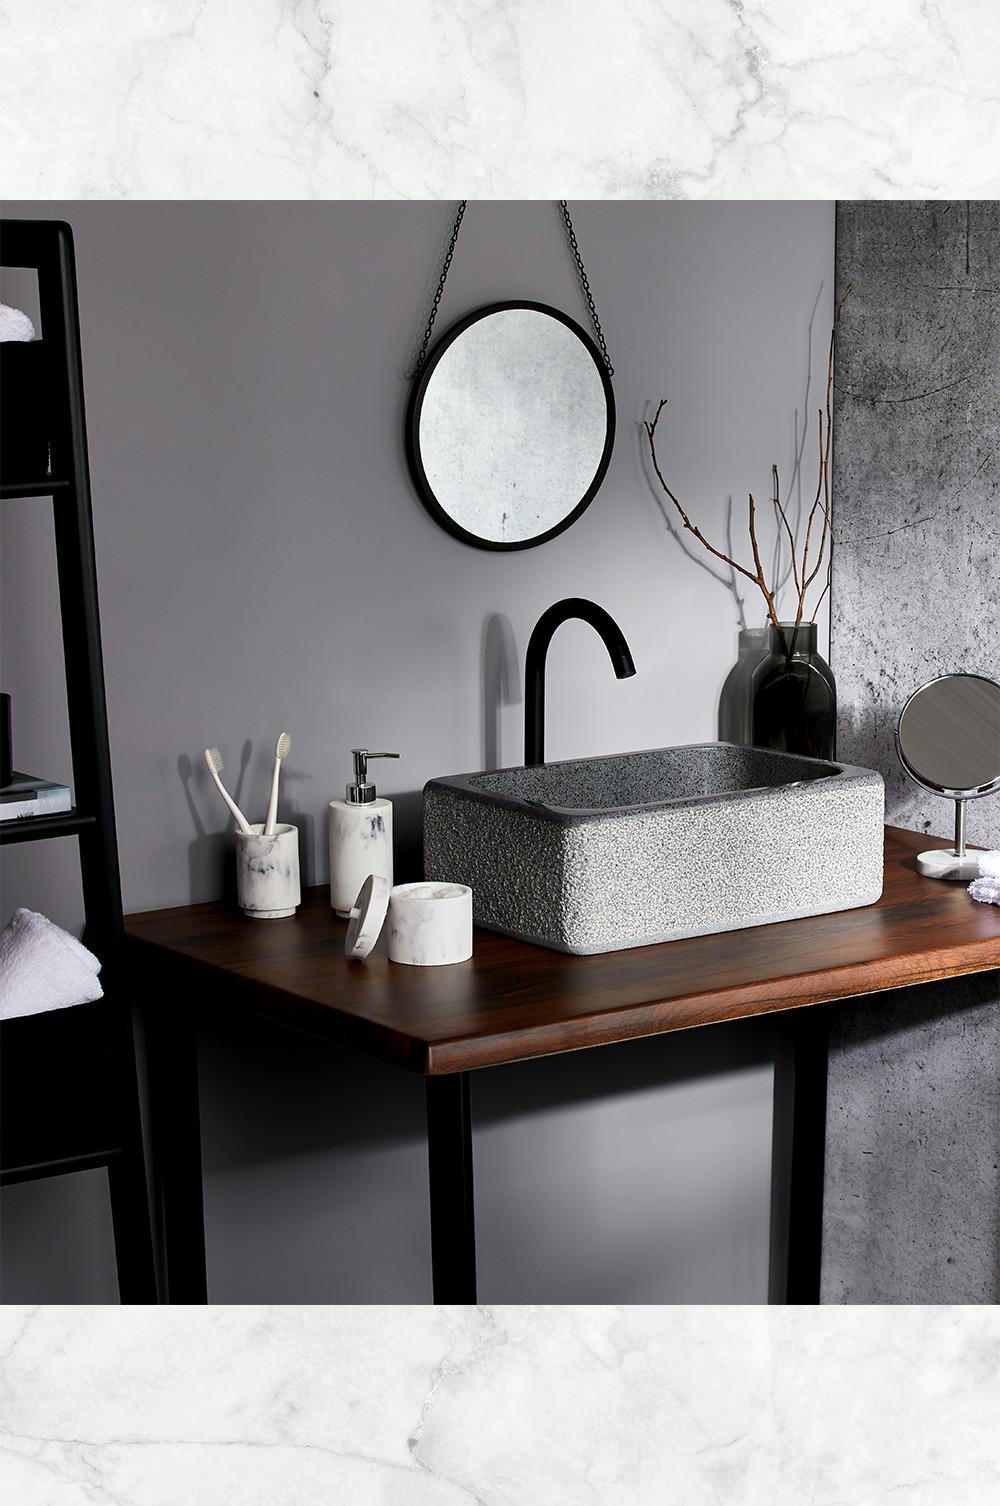 Calming bathroom image with bathroom accessories full size